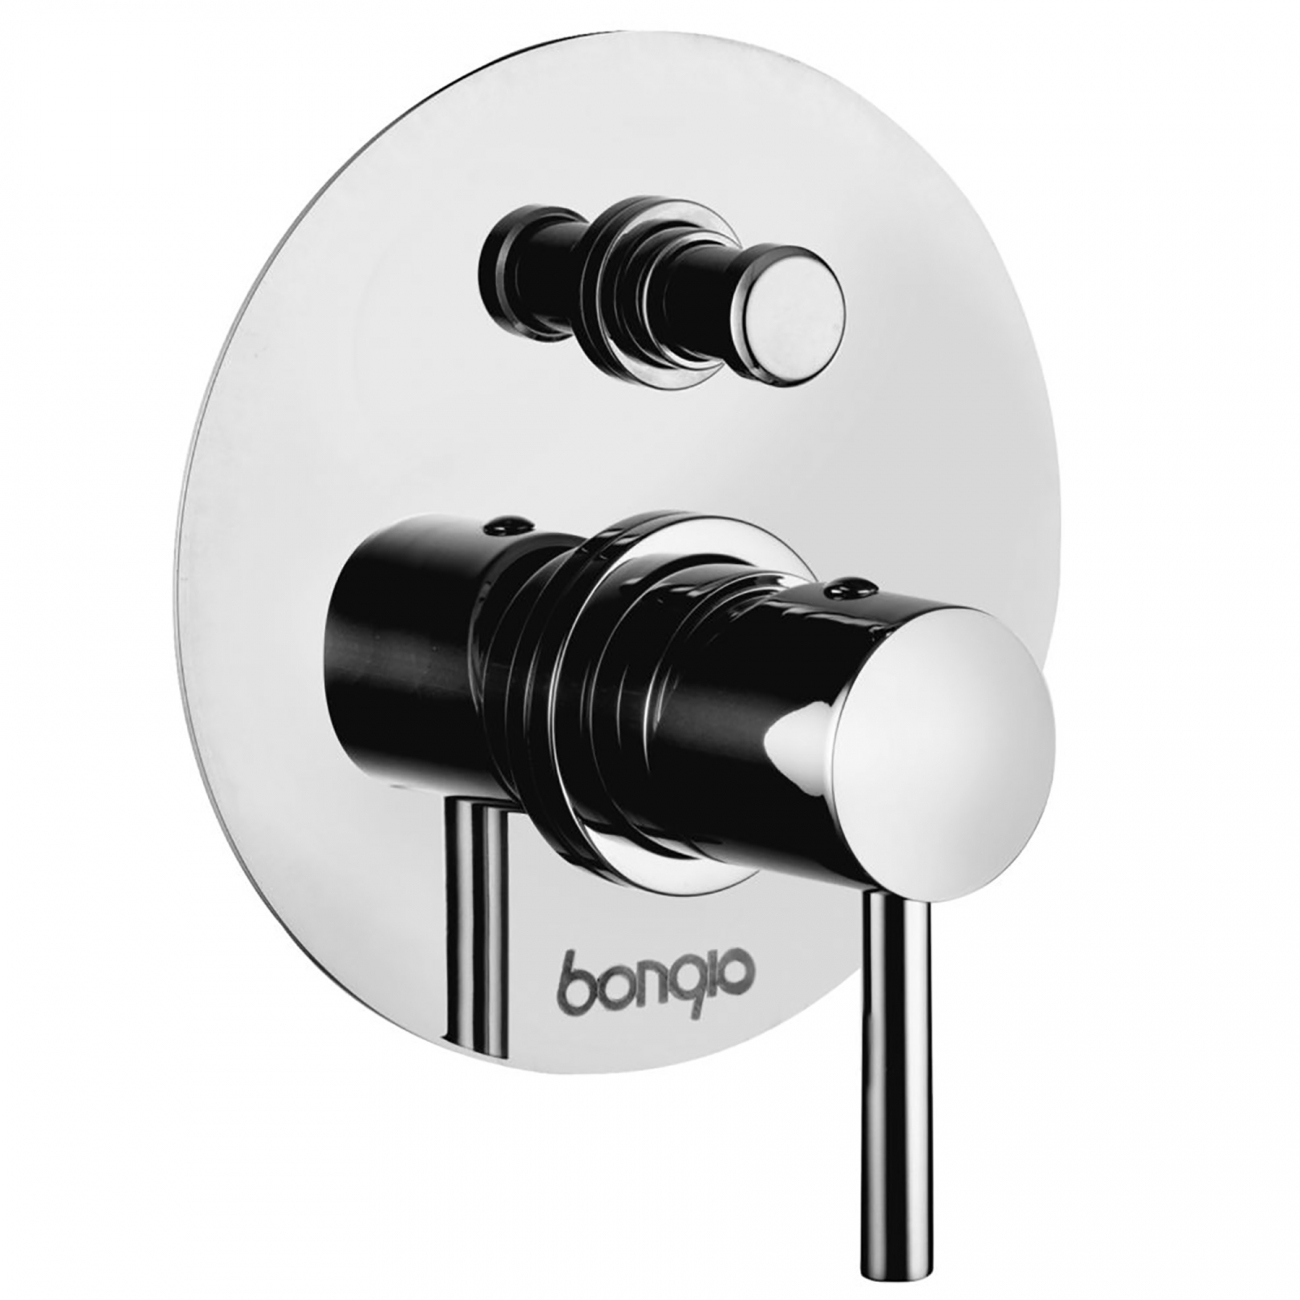 Bongio Project T.ube Wall Mounted Mixer with Diverter